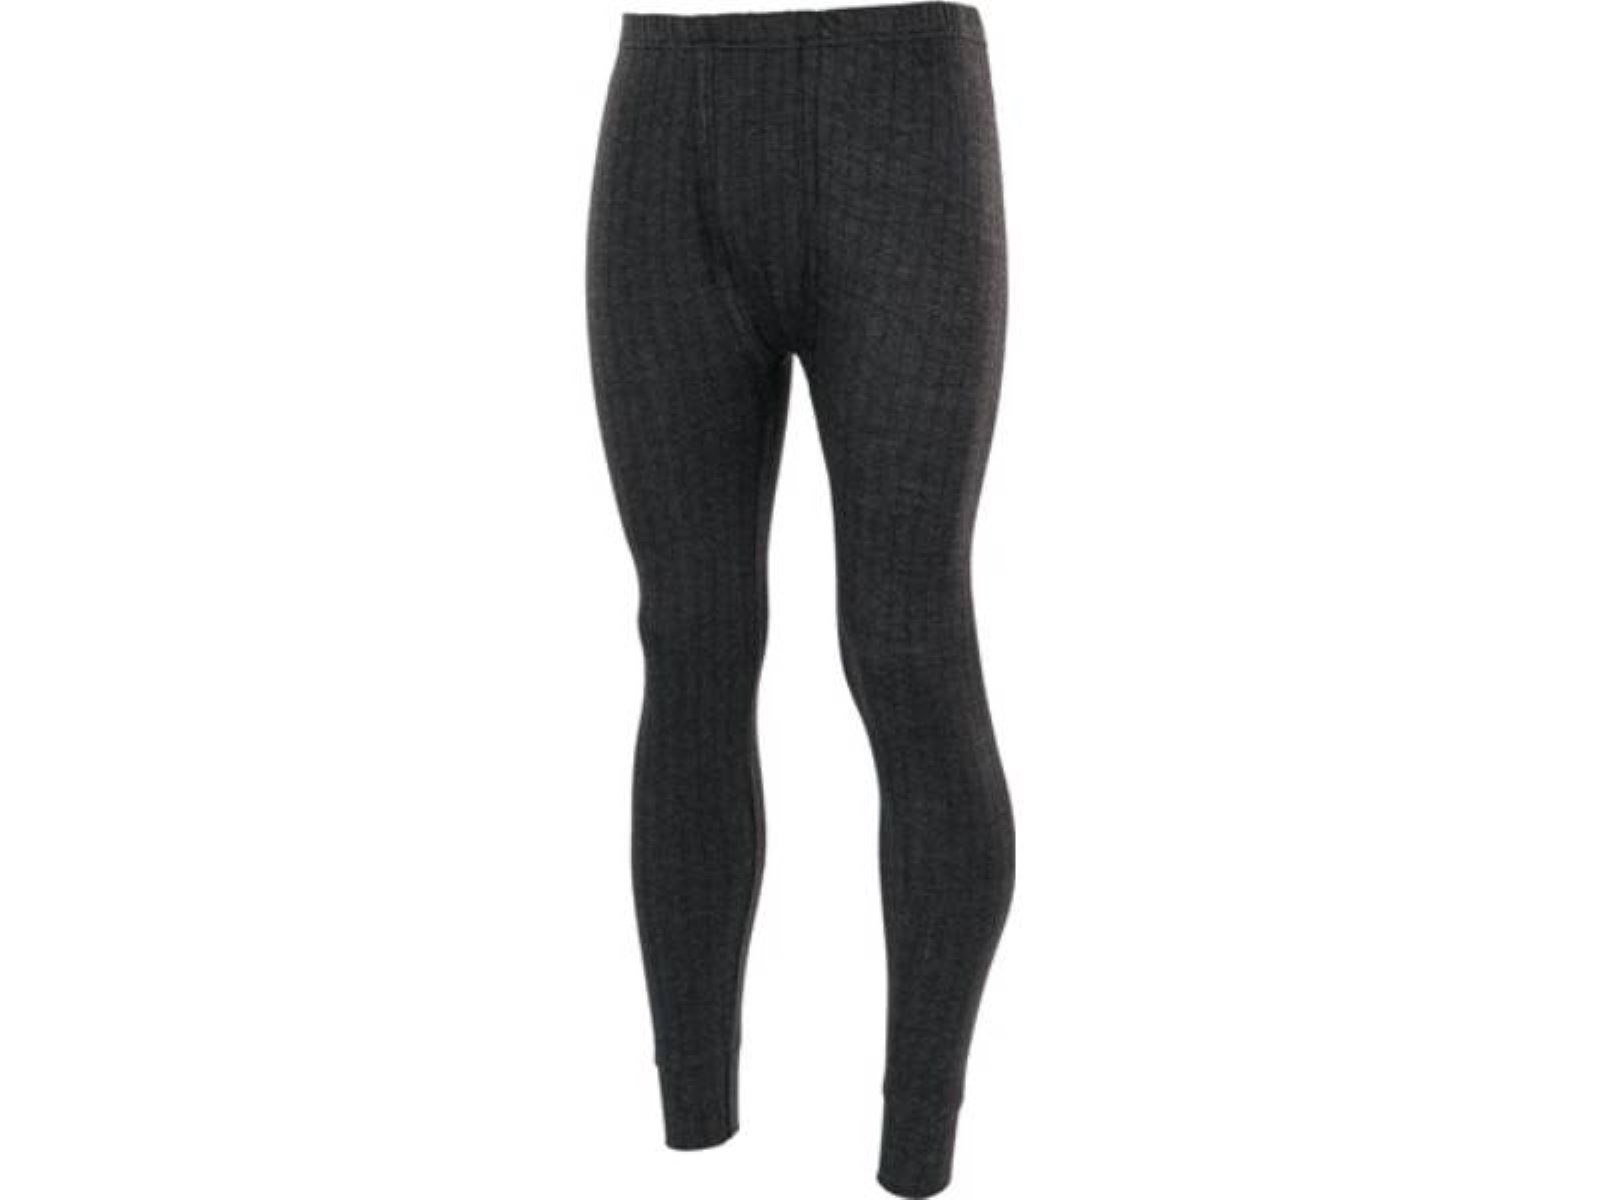 ISM 75% Gr.XXL Thermo-Funktionshose Material: Schutzhose Bau THERMOGETIC anth.ISM TRS